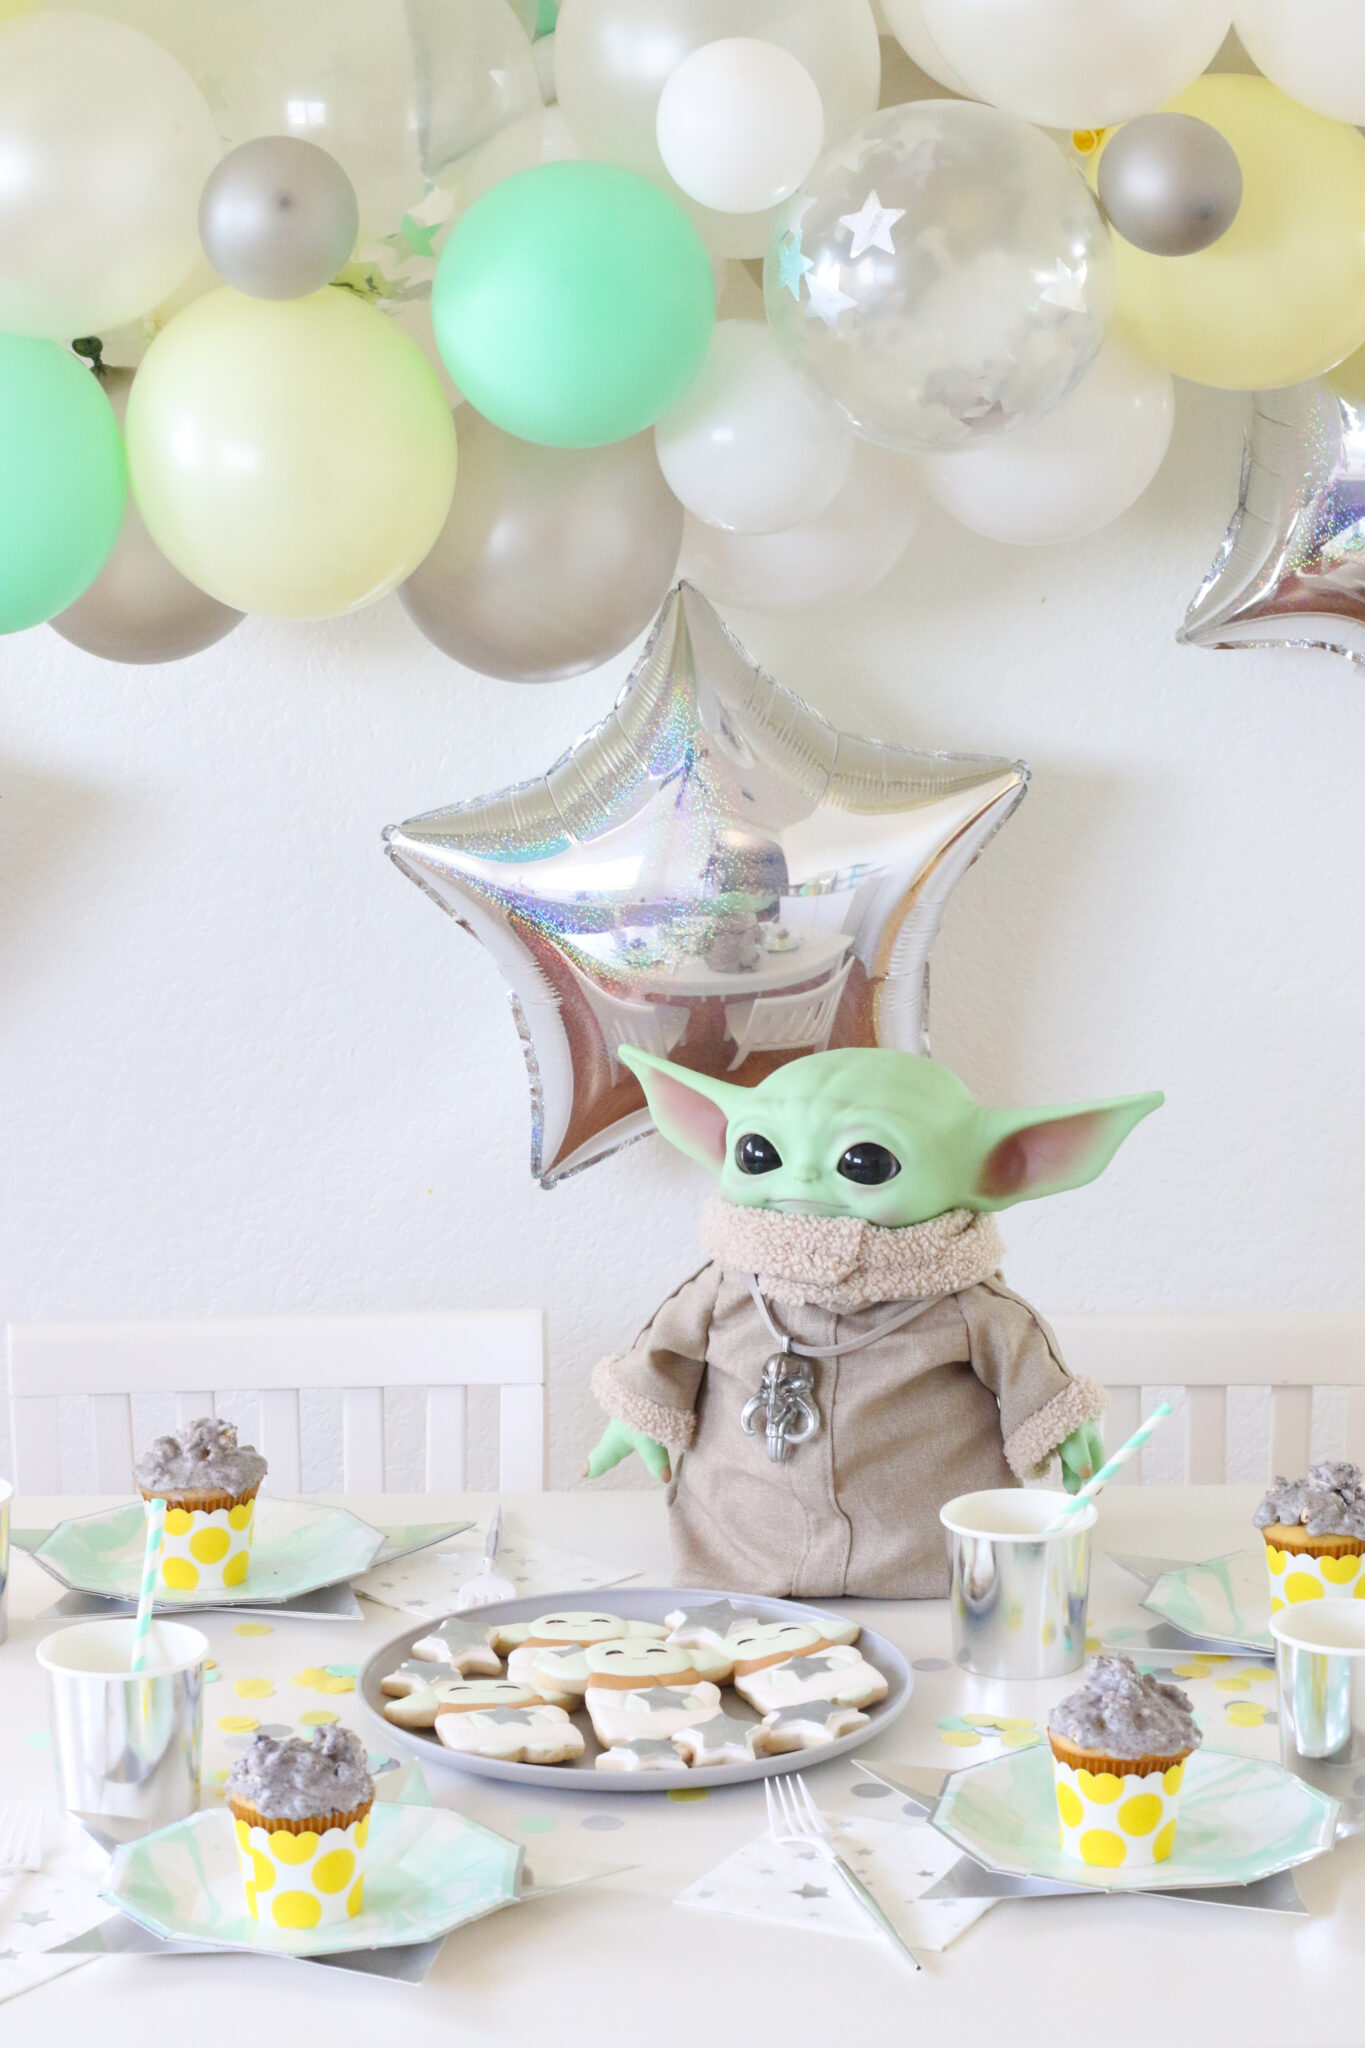 Our Little Boy's Baby Yoda 2nd Birthday Party - TWINKLE TWINKLE LITTLE